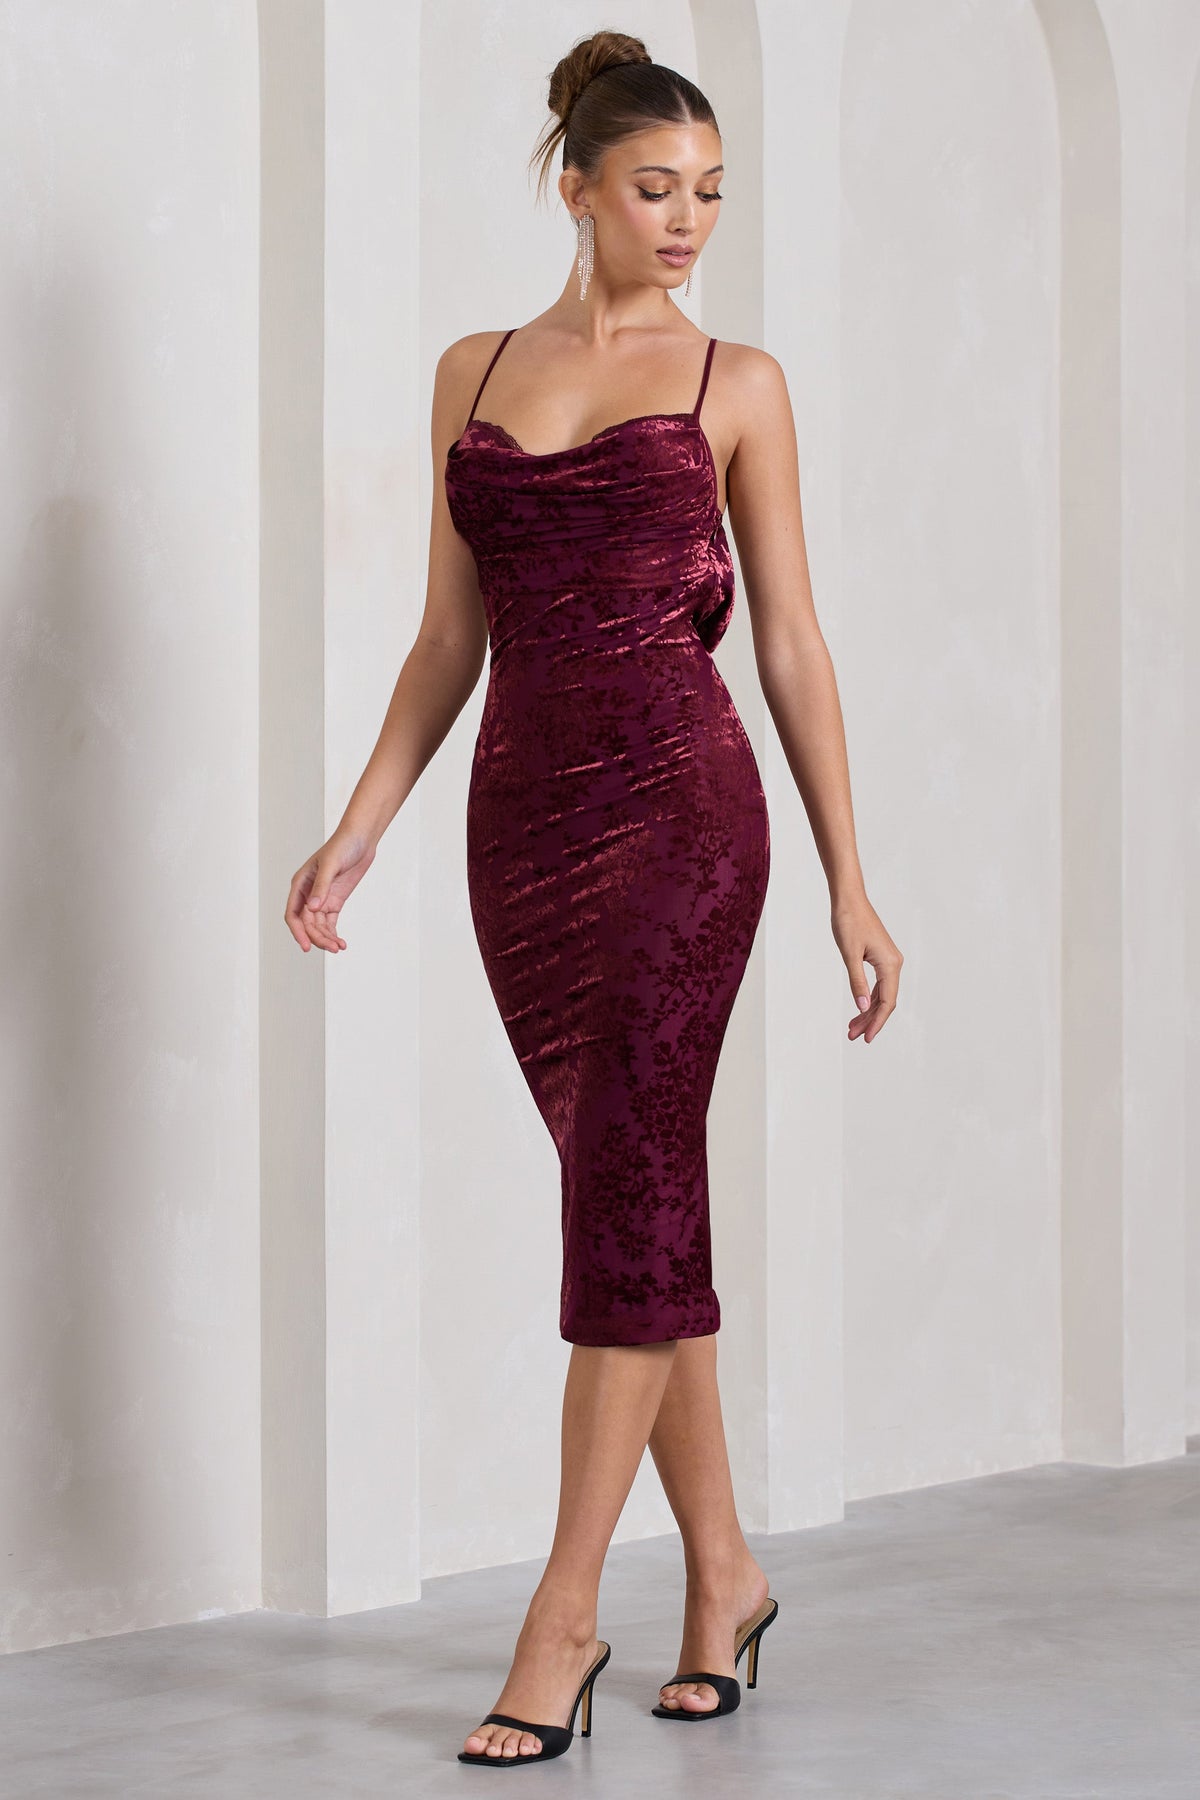 Romagic Strapless Padded Off the Shoulder A Line Burgundy